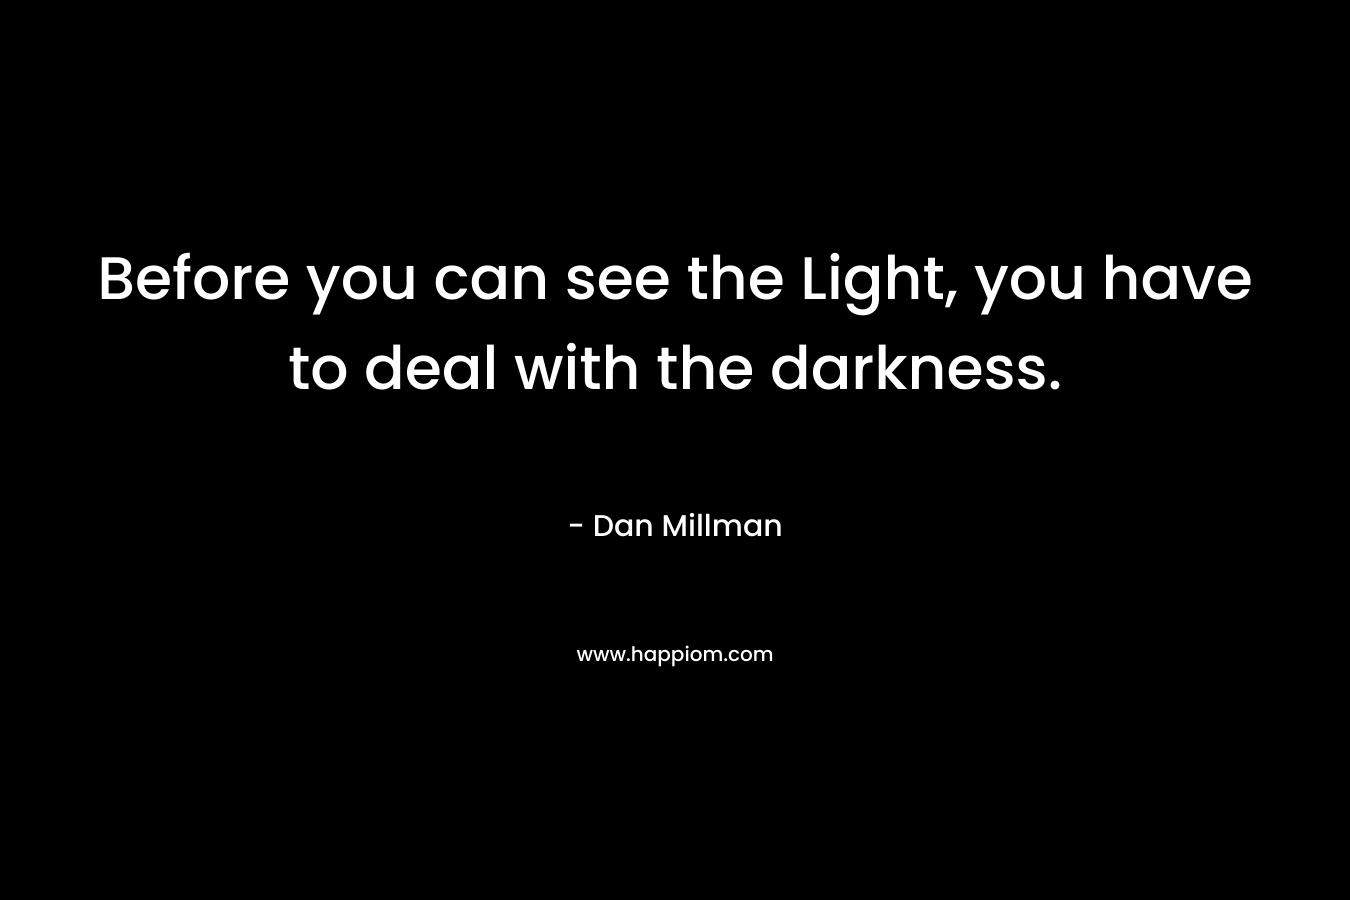 Before you can see the Light, you have to deal with the darkness. – Dan Millman